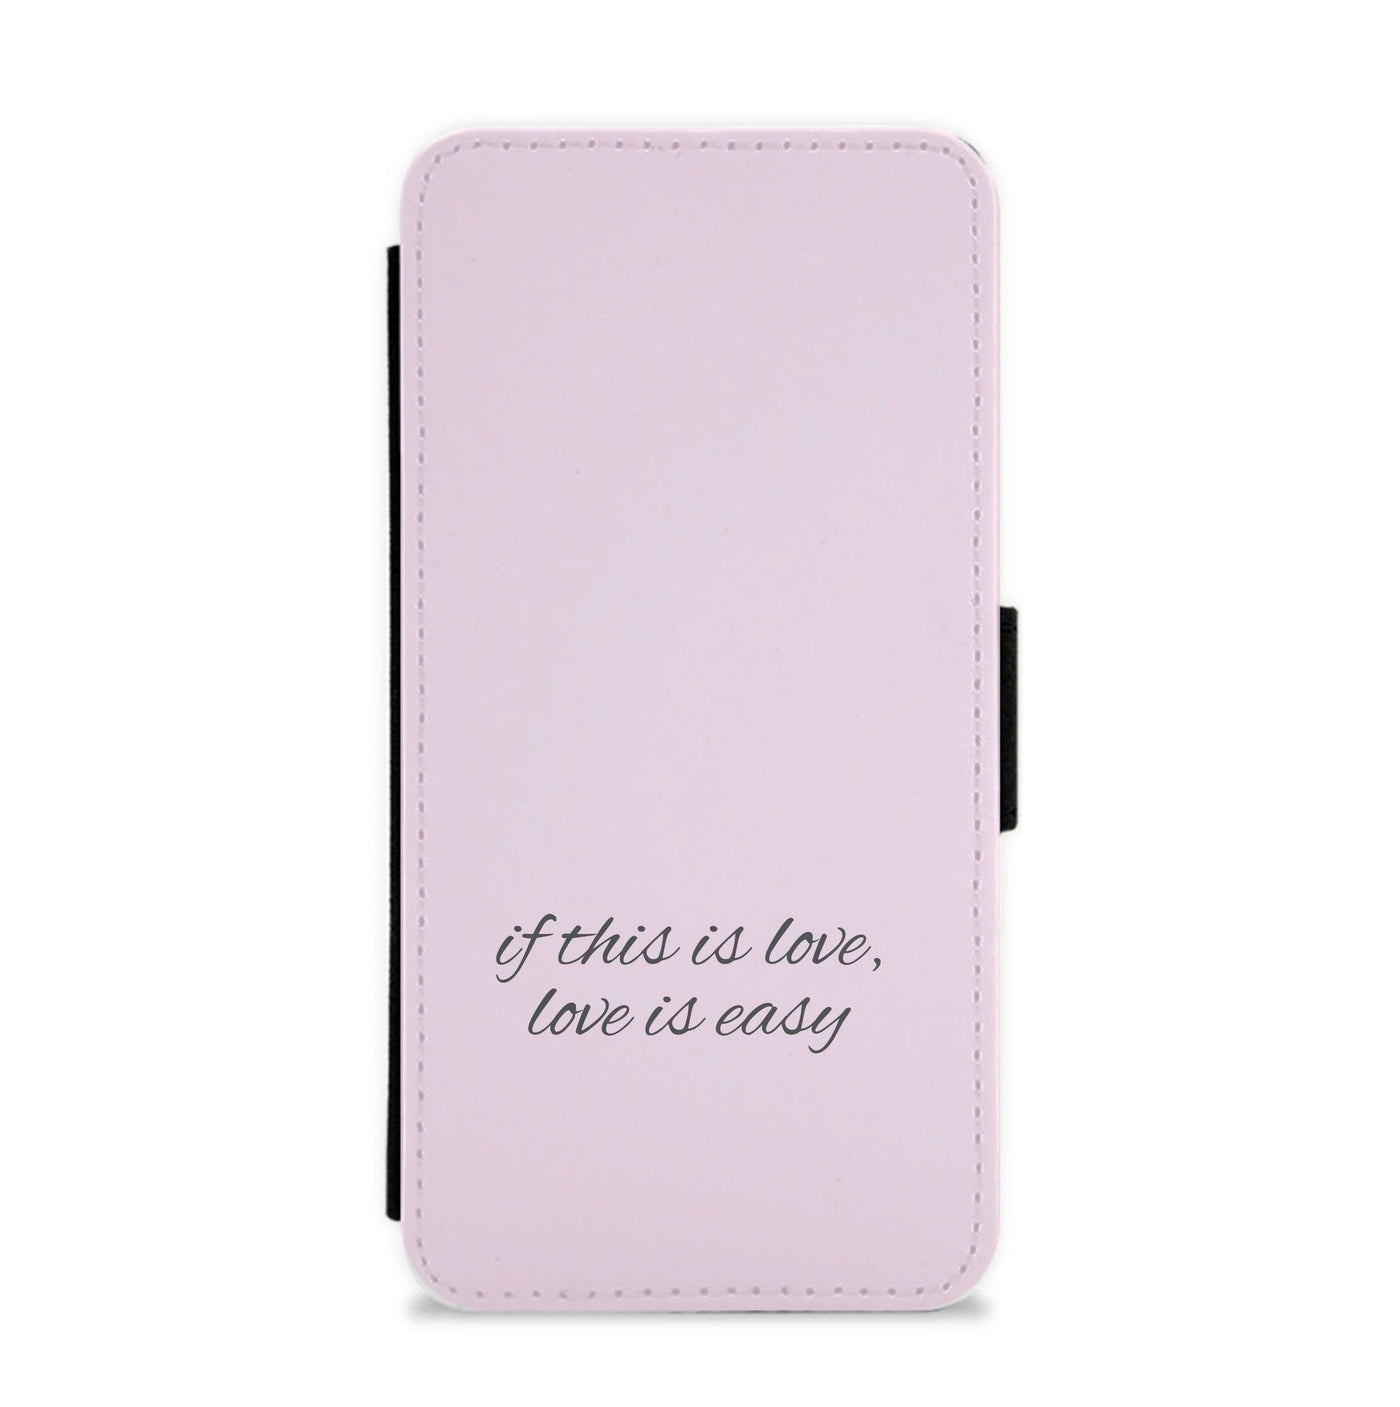 If This Is Love, Love Is Easy - McFly Flip / Wallet Phone Case